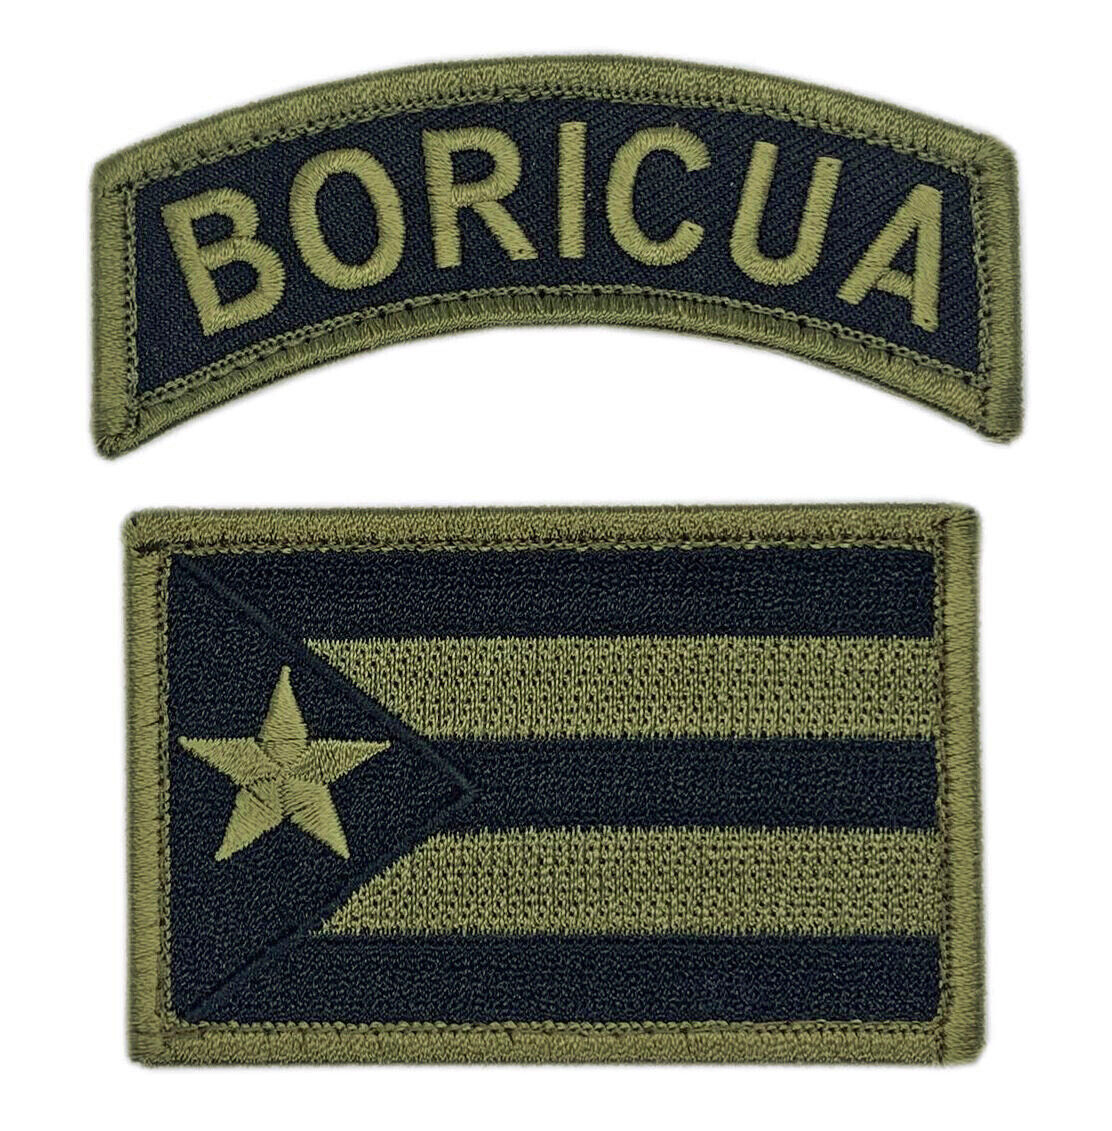 Puerto Rico State Flag Boricua Patch [2PC - Hook Fastener Backing - P16,T2]